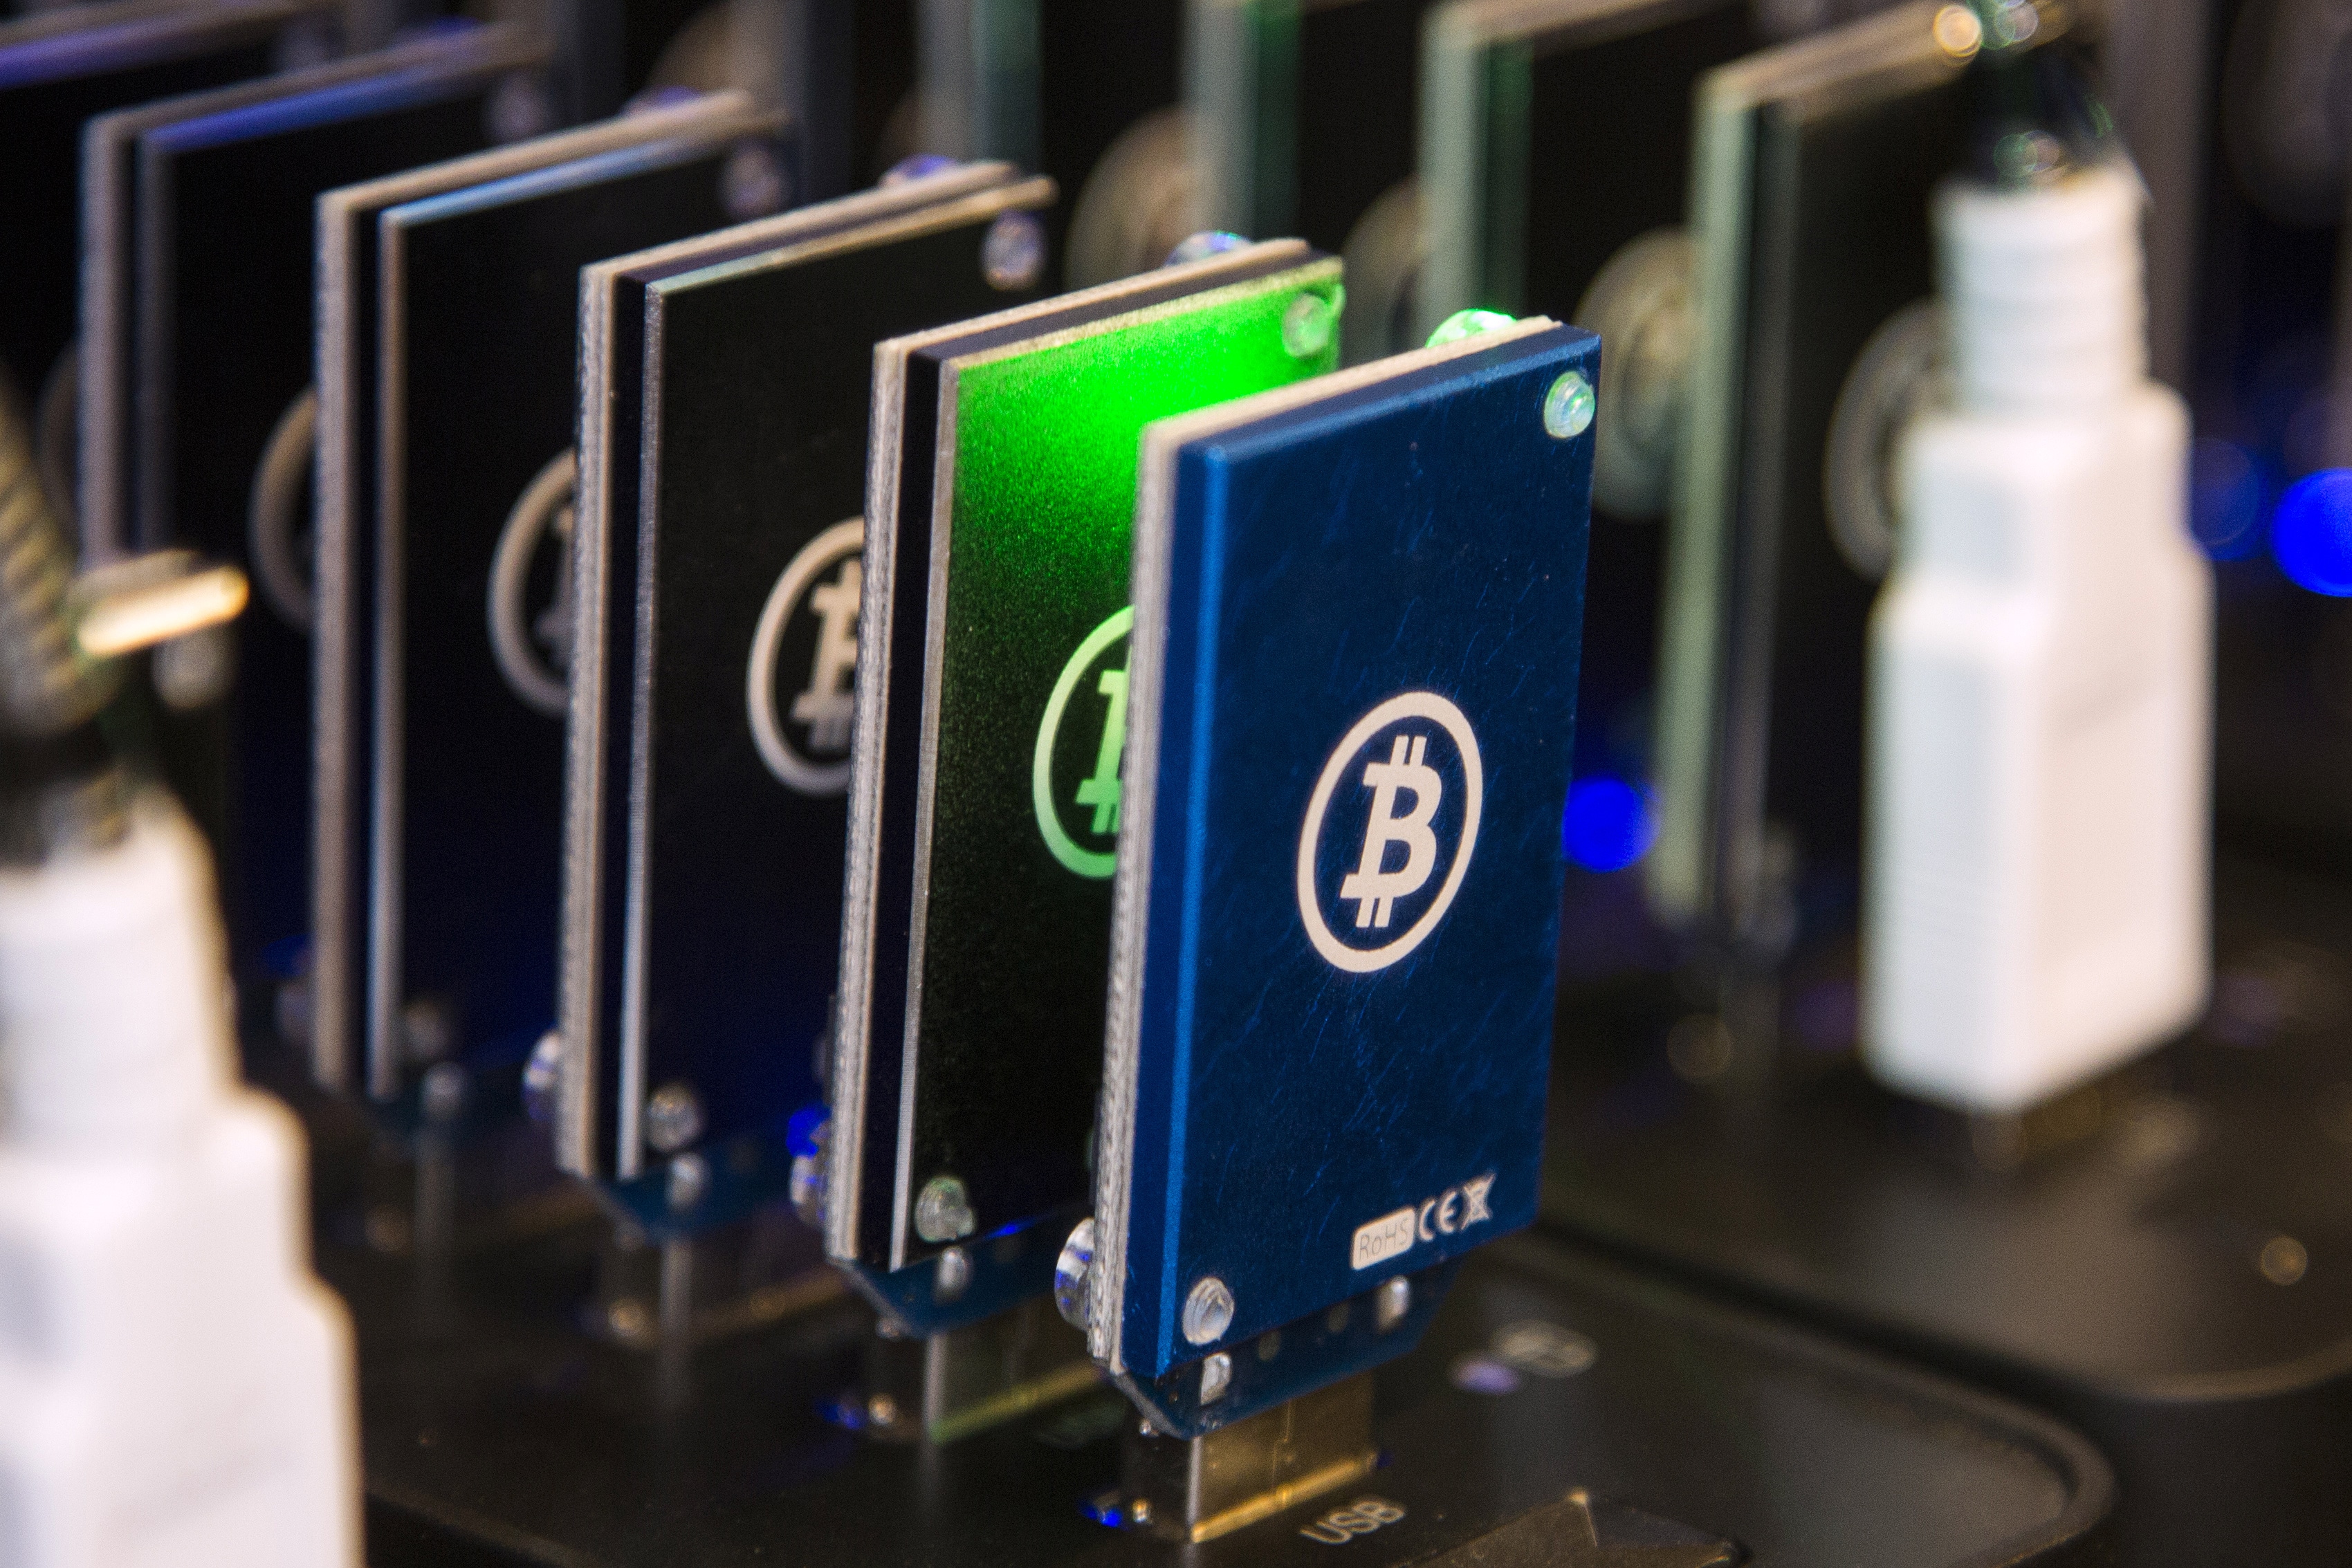 Japan's GMO Expands Cryptocurrency Business with Bitcoin Mining